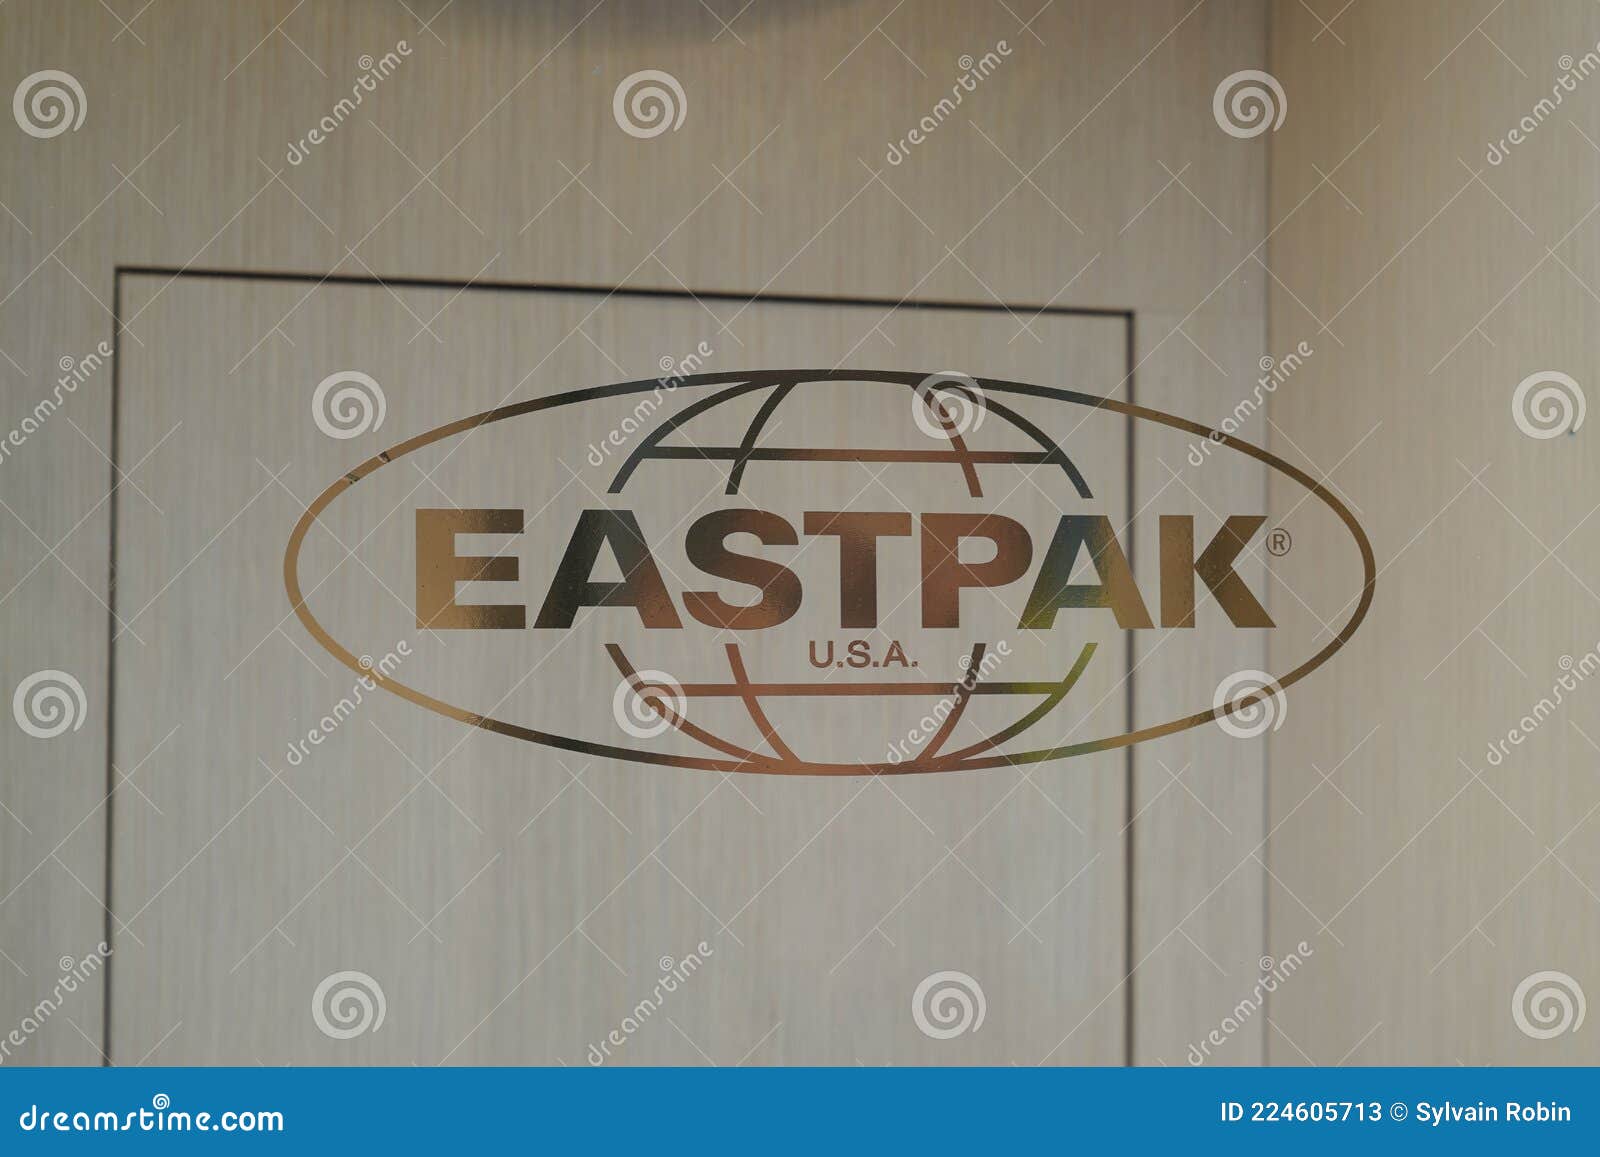 Eastpak Shop Logo Brand and Text Sign for Bags Boutique Editorial Stock Photo - Image of business, 224605713